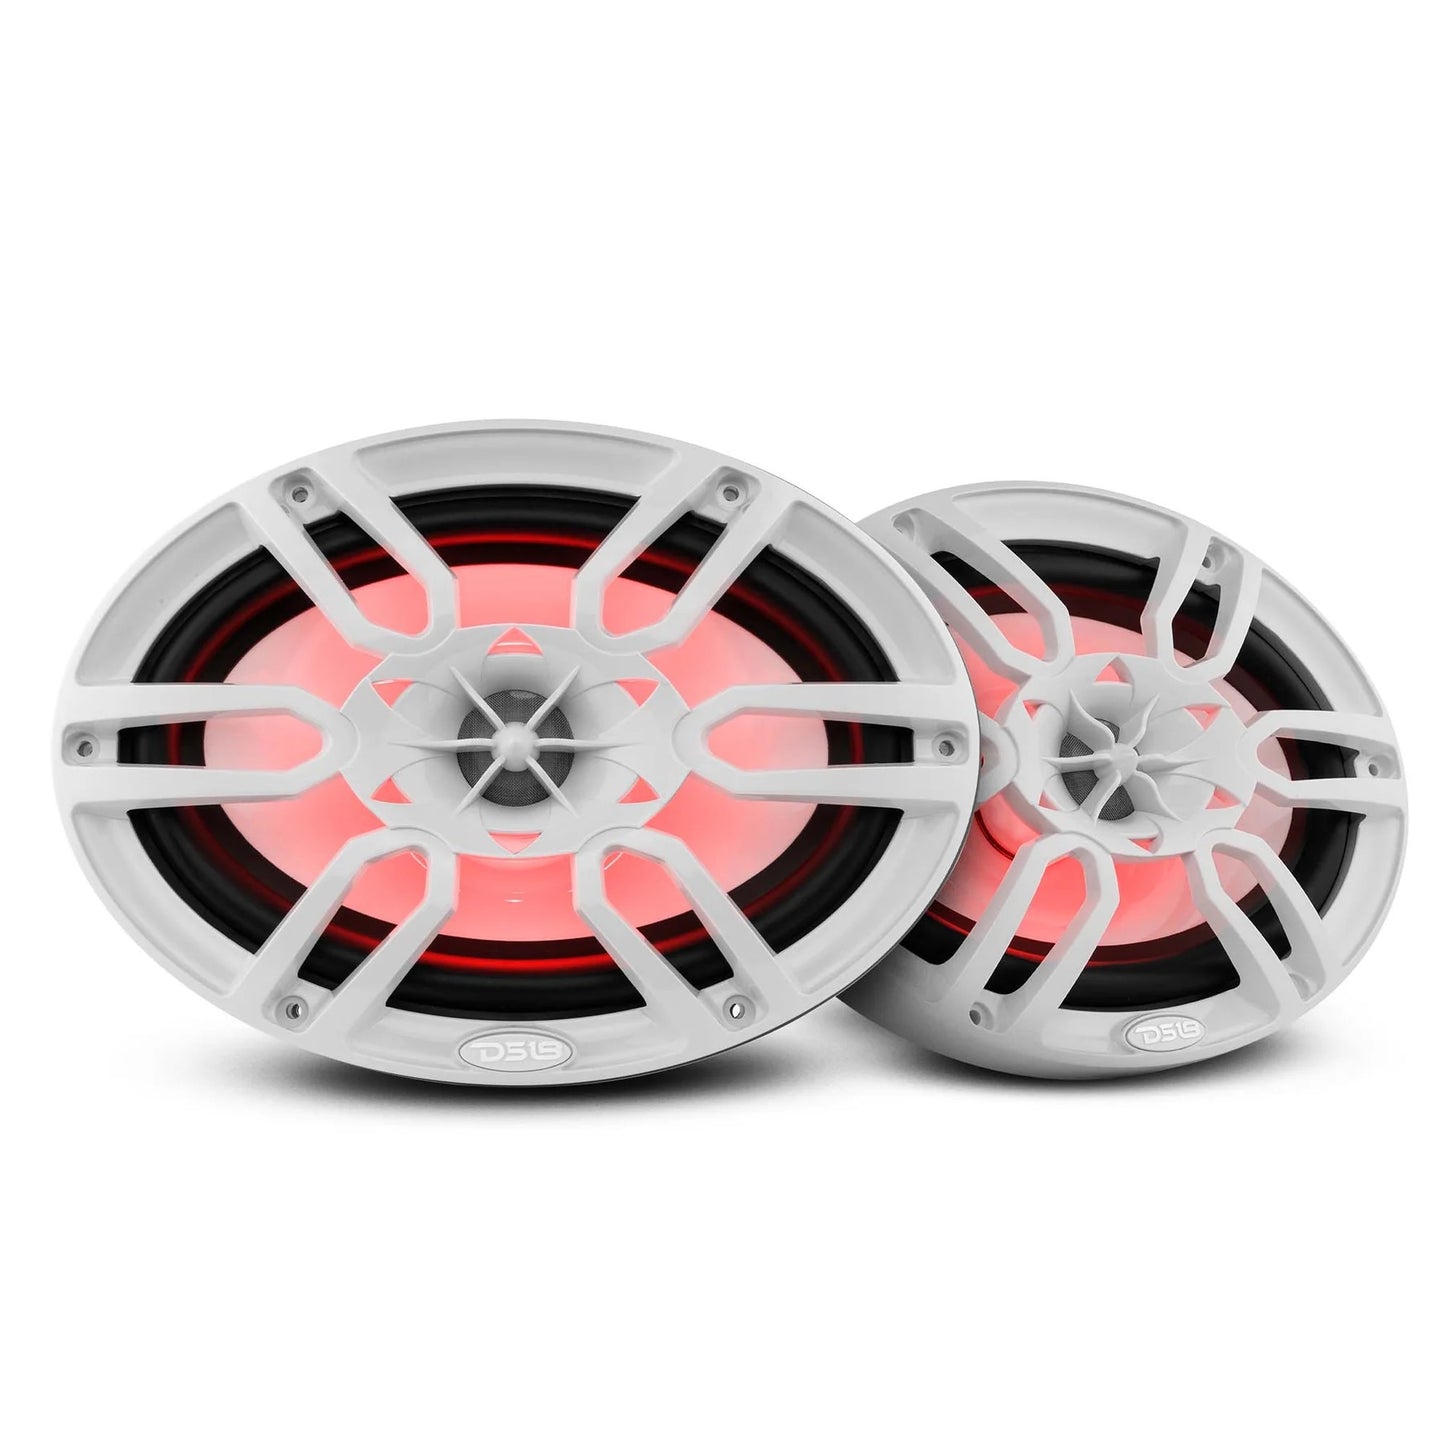 DS18 NXL-69/WH HYDRO 6X9" 2-Way Audio Marine Speakers with Integrated RGB LED Lights 375 Watts